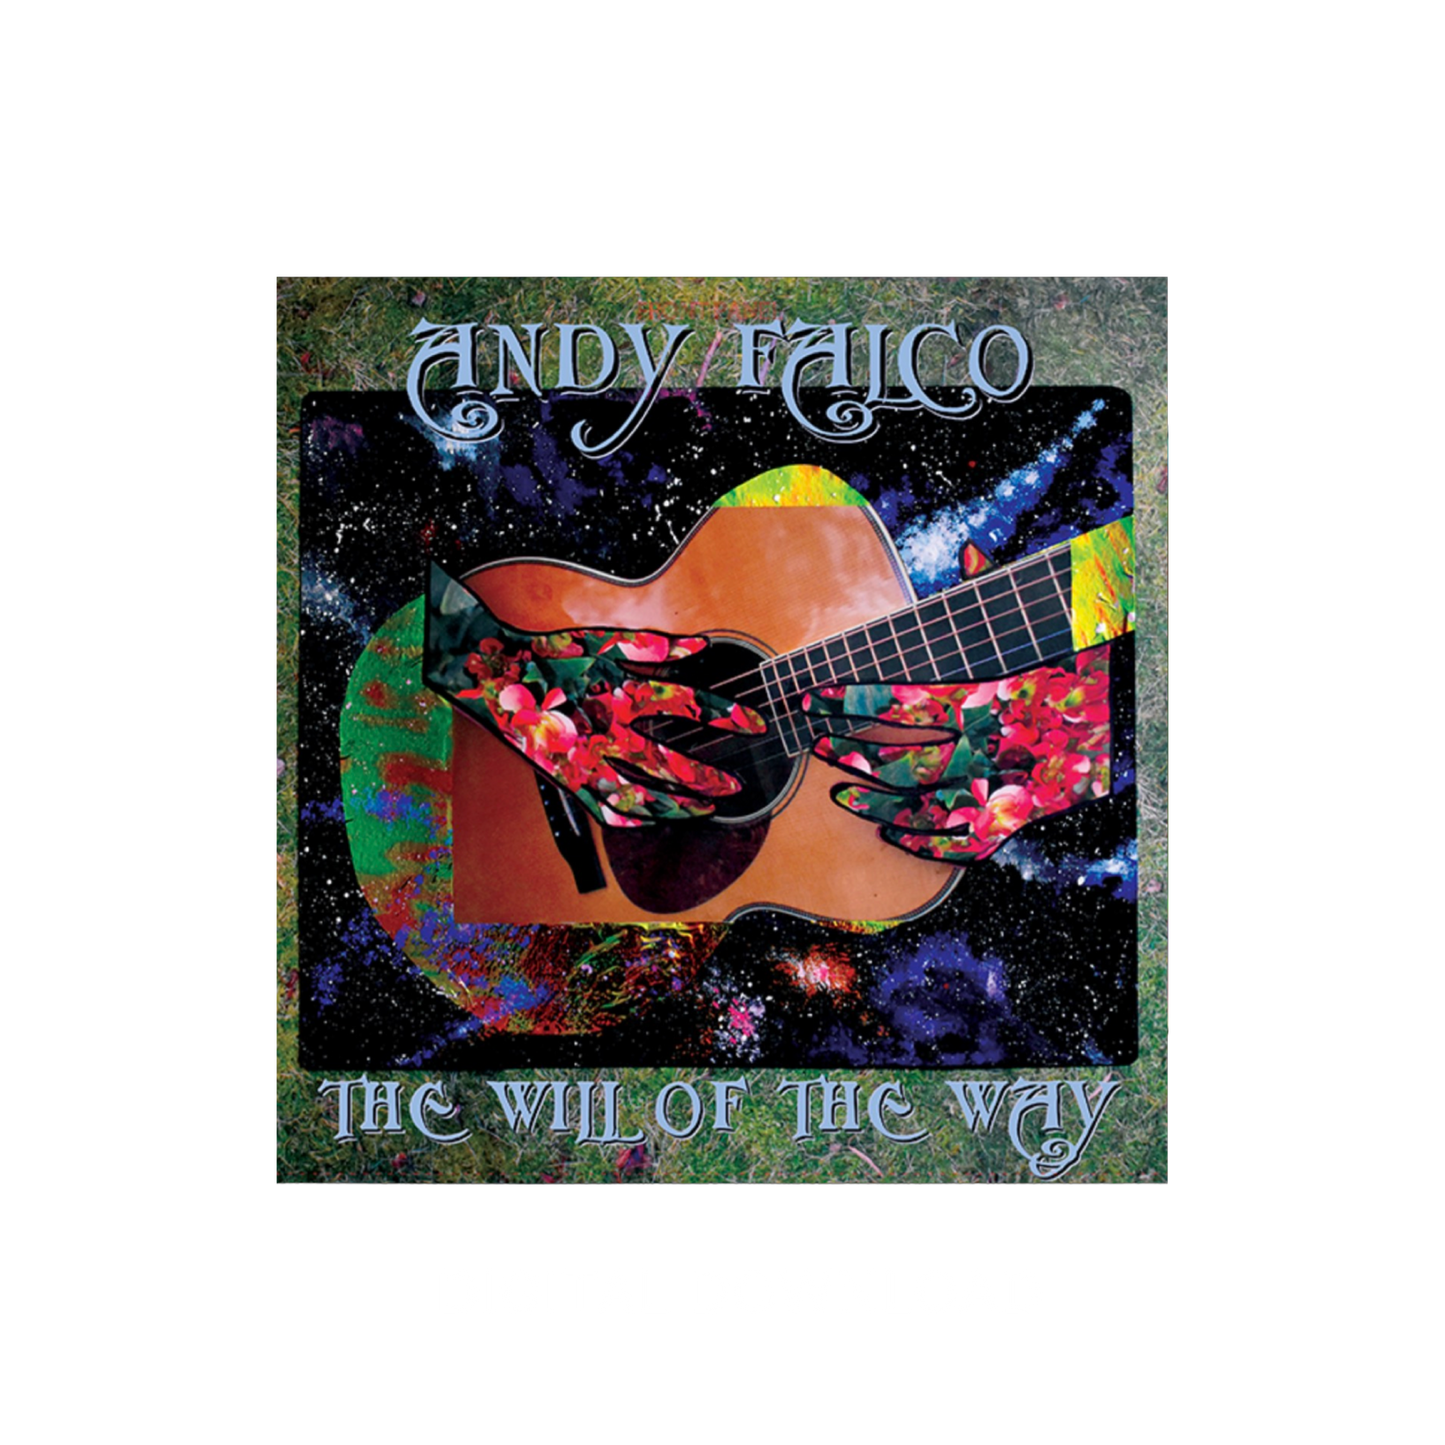 Andy Falco - "The Will of The Way" Digital Download